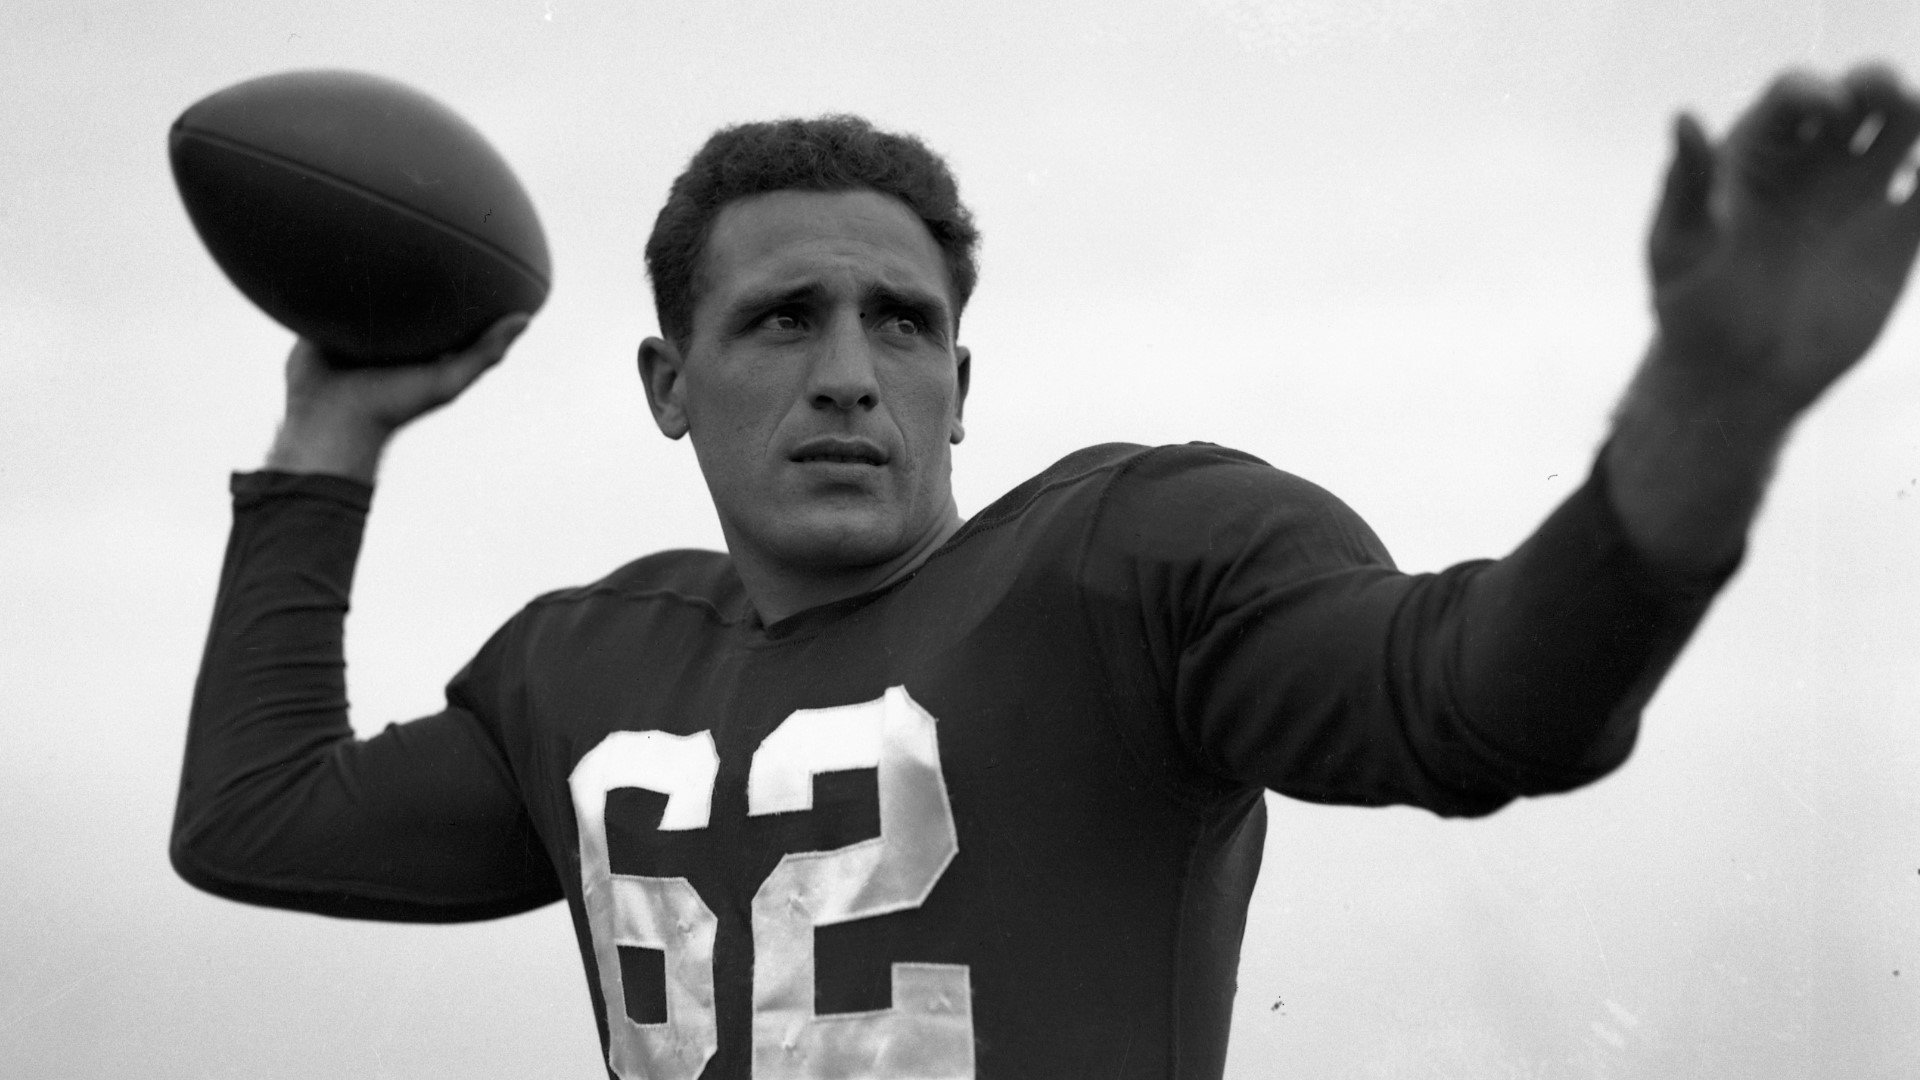 Former Pittston High School, University of Georgia, and NFL star Charley Trippi has died at the age of 100